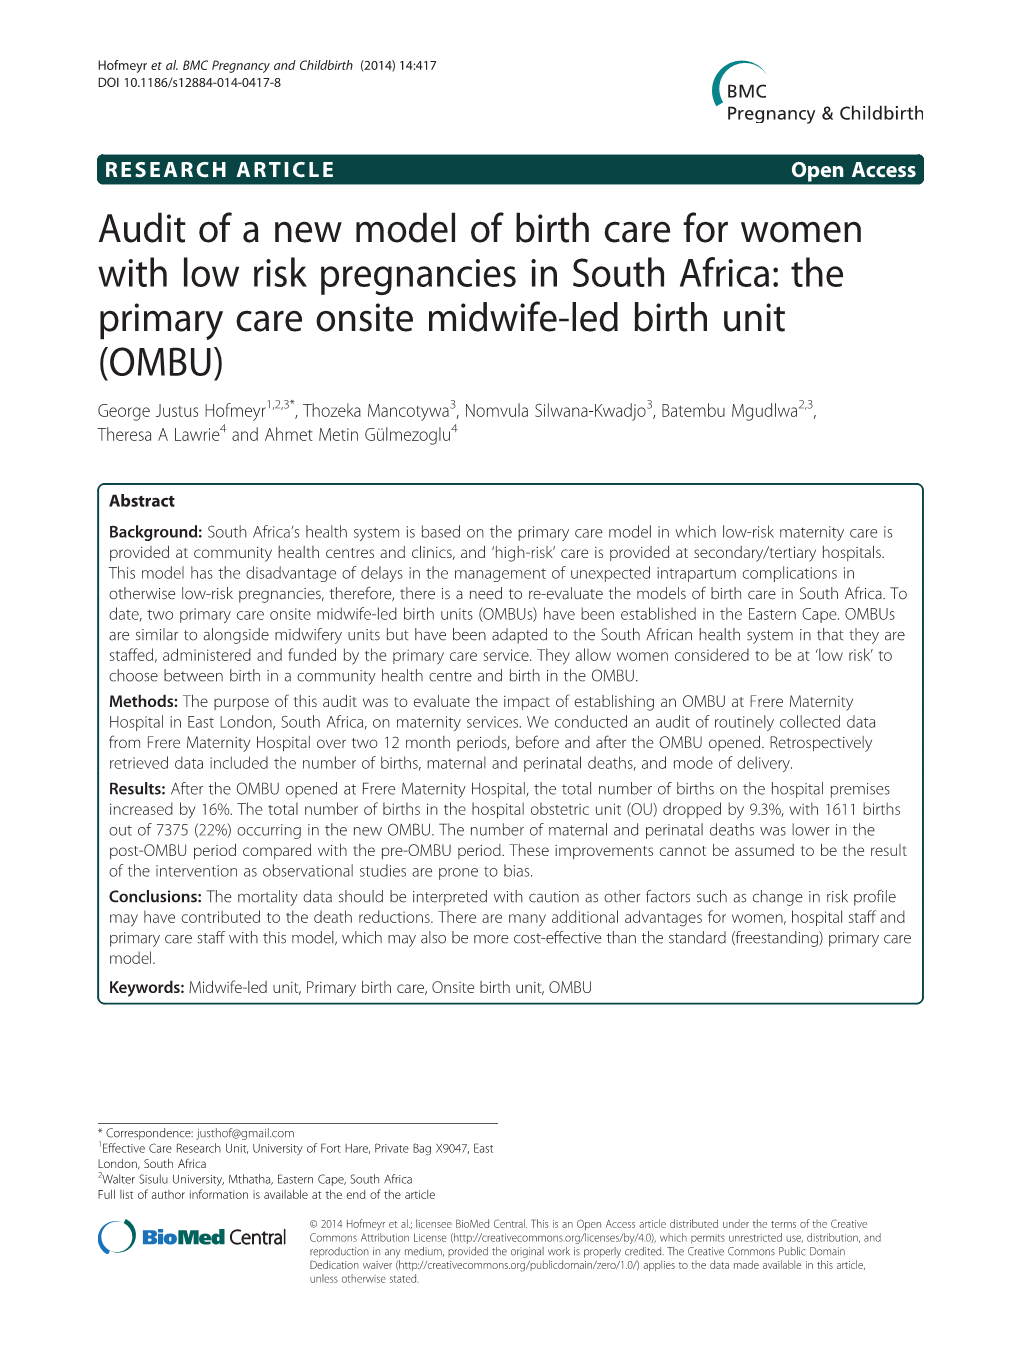 The Primary Care Onsite Midwife-Led Birth Unit (OMBU)